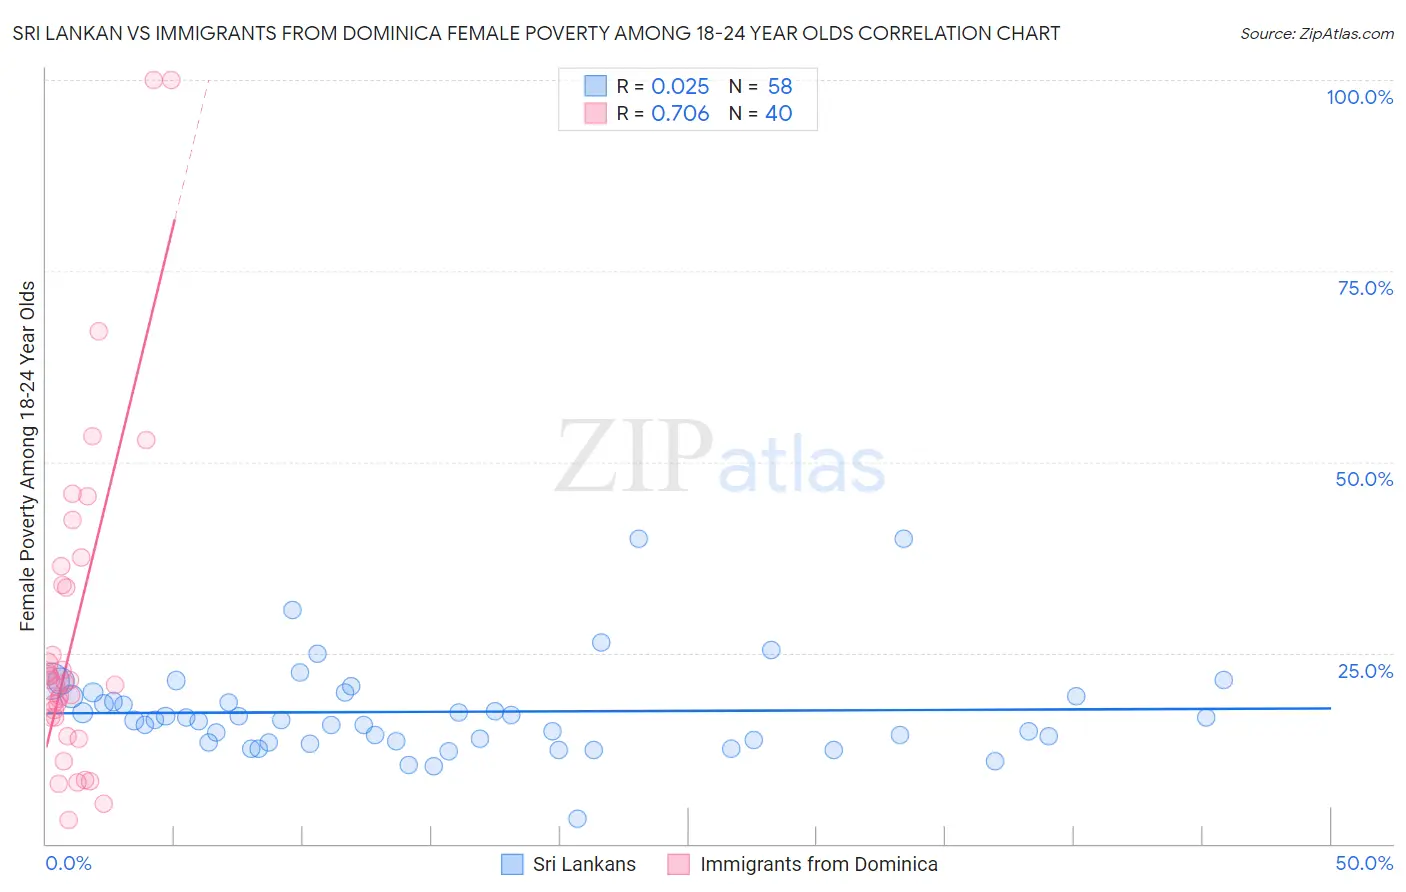 Sri Lankan vs Immigrants from Dominica Female Poverty Among 18-24 Year Olds